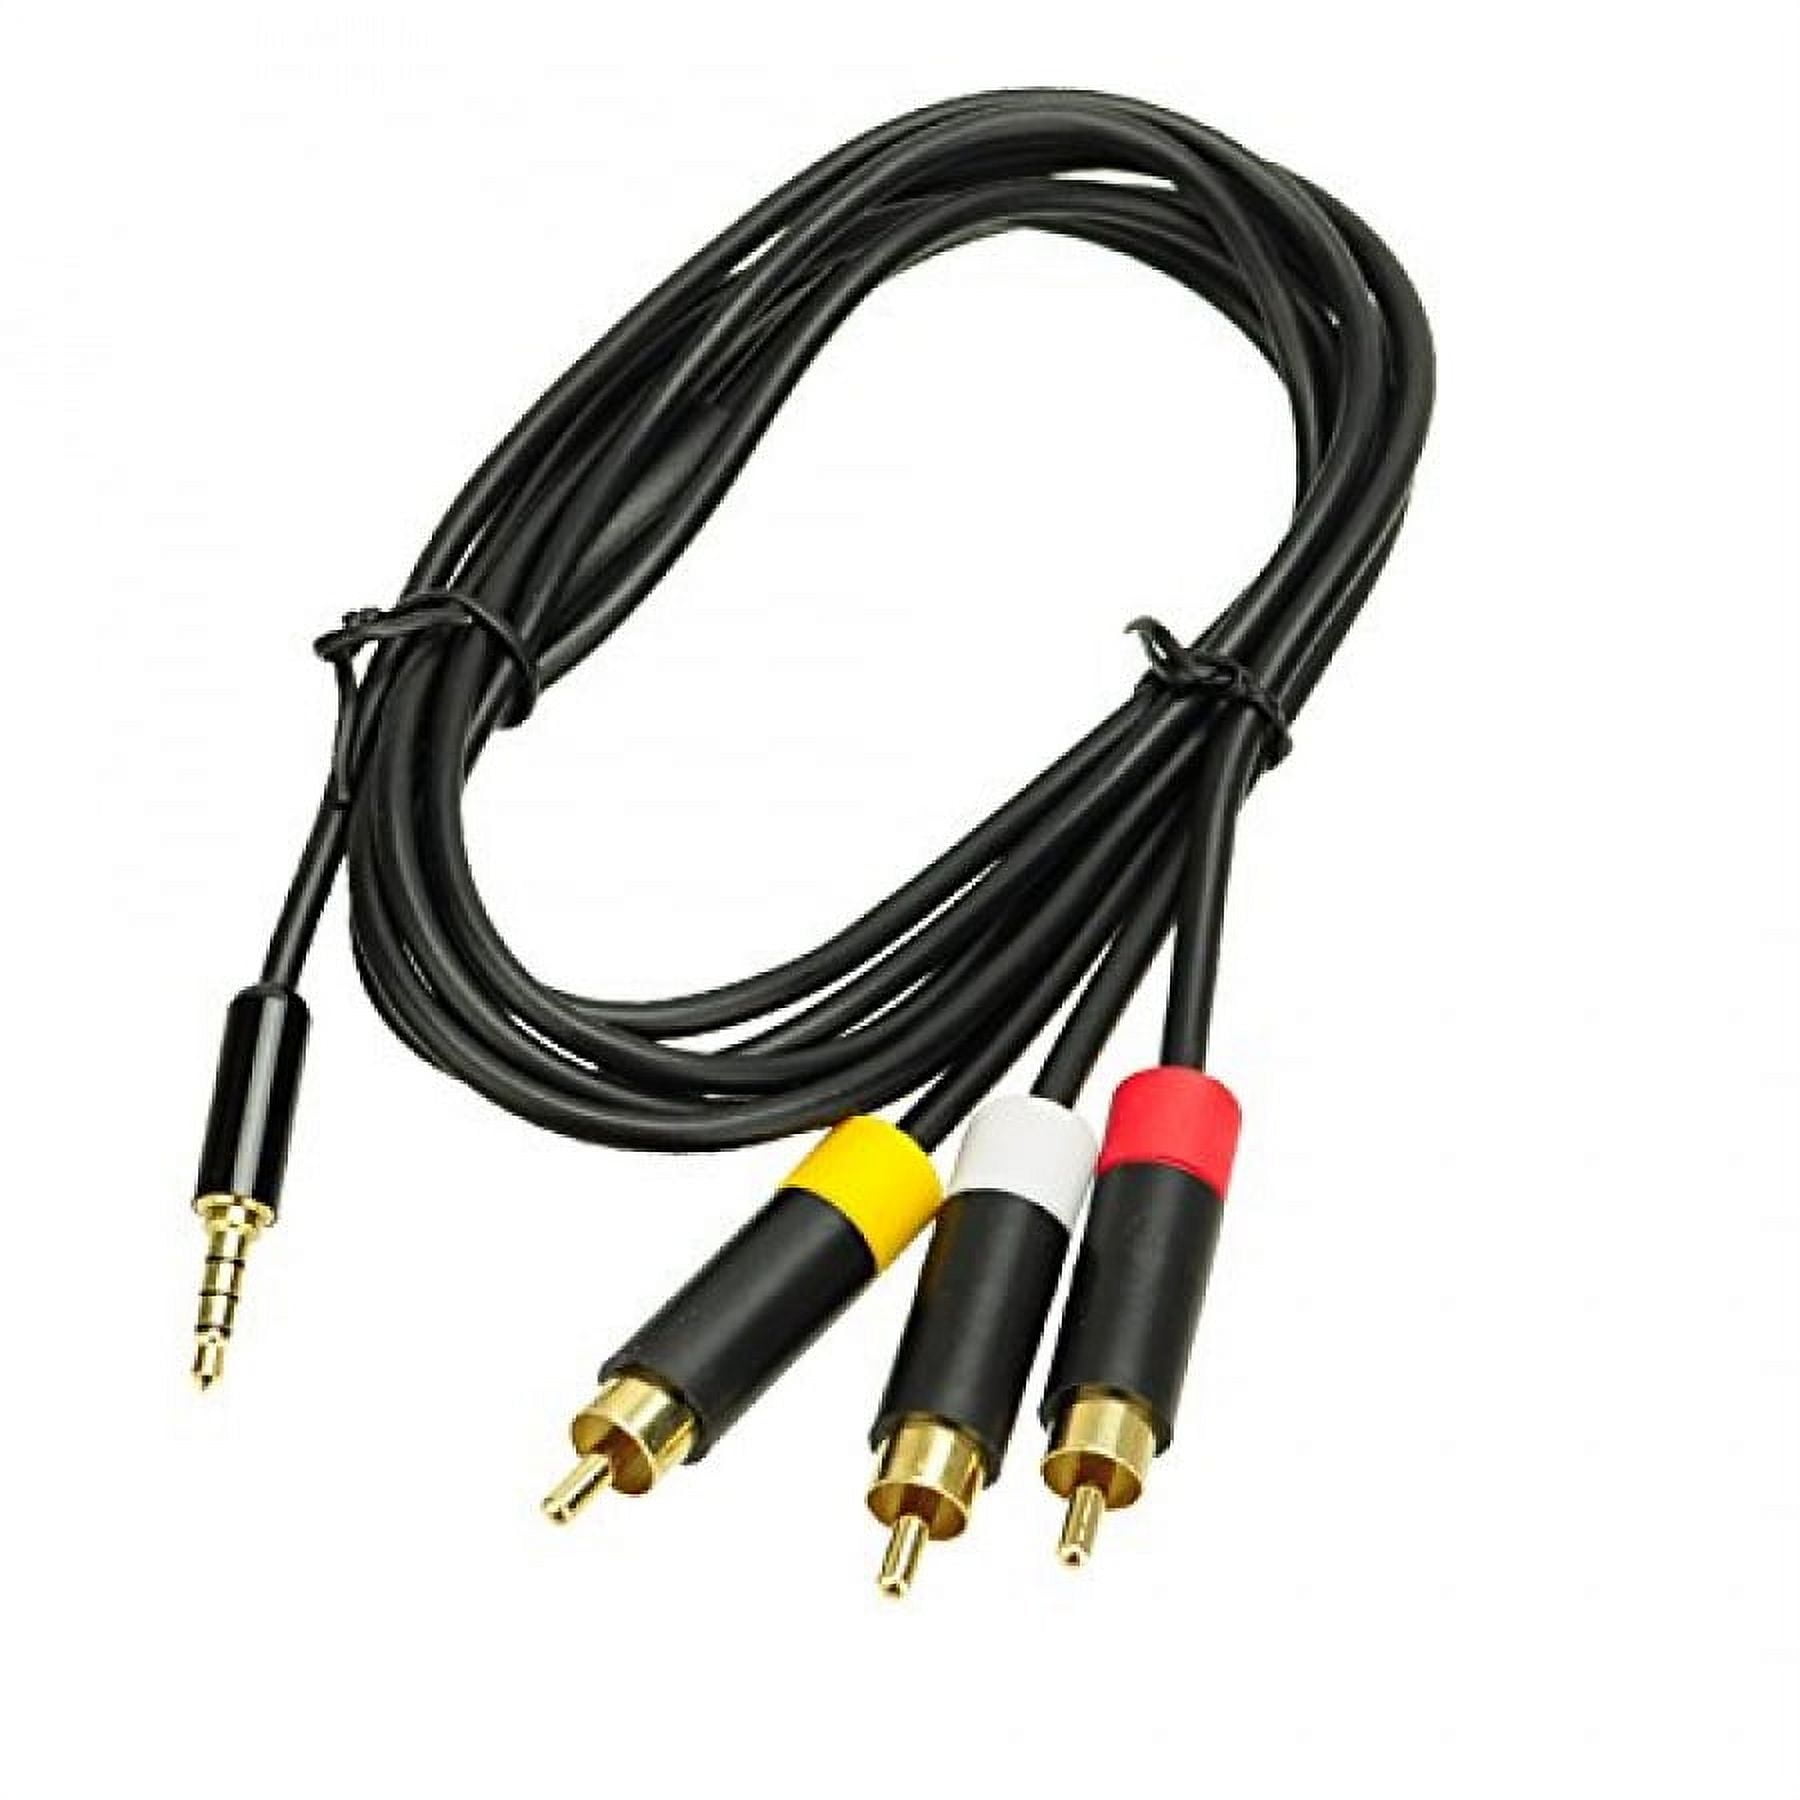 Composite AV Cable for XBox 360 E by Mars Devices